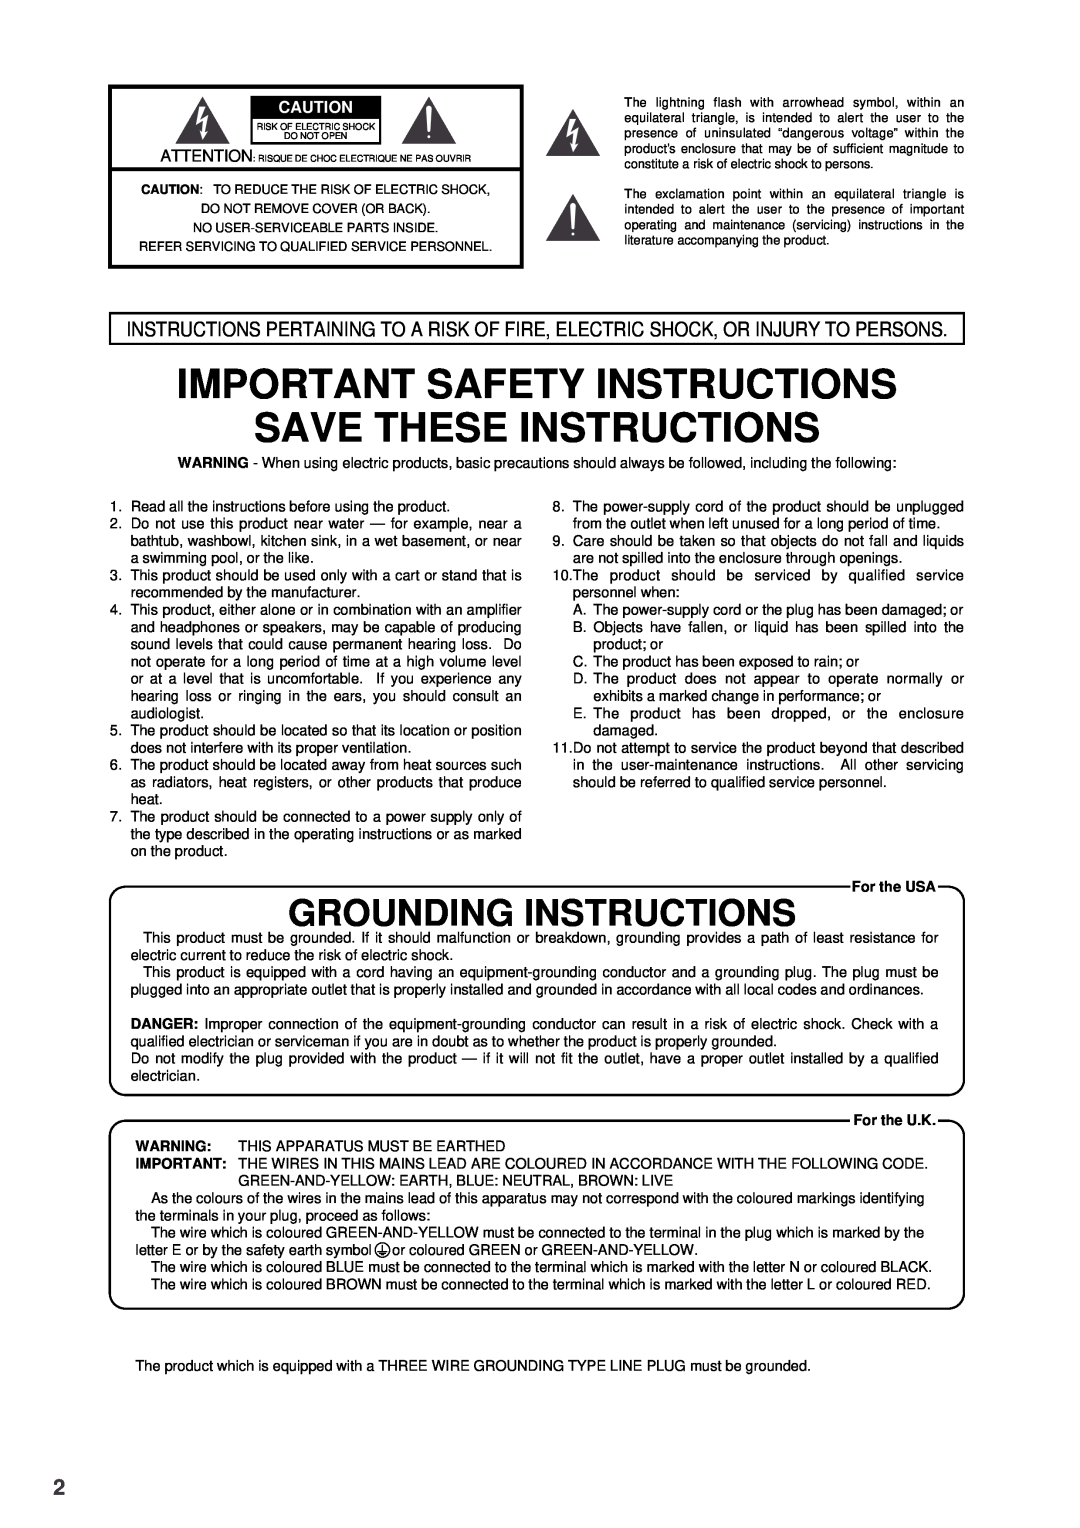 Roland SRA-200E Important Safety Instructions, Save These Instructions, Grounding Instructions, For the USA, For the U.K 